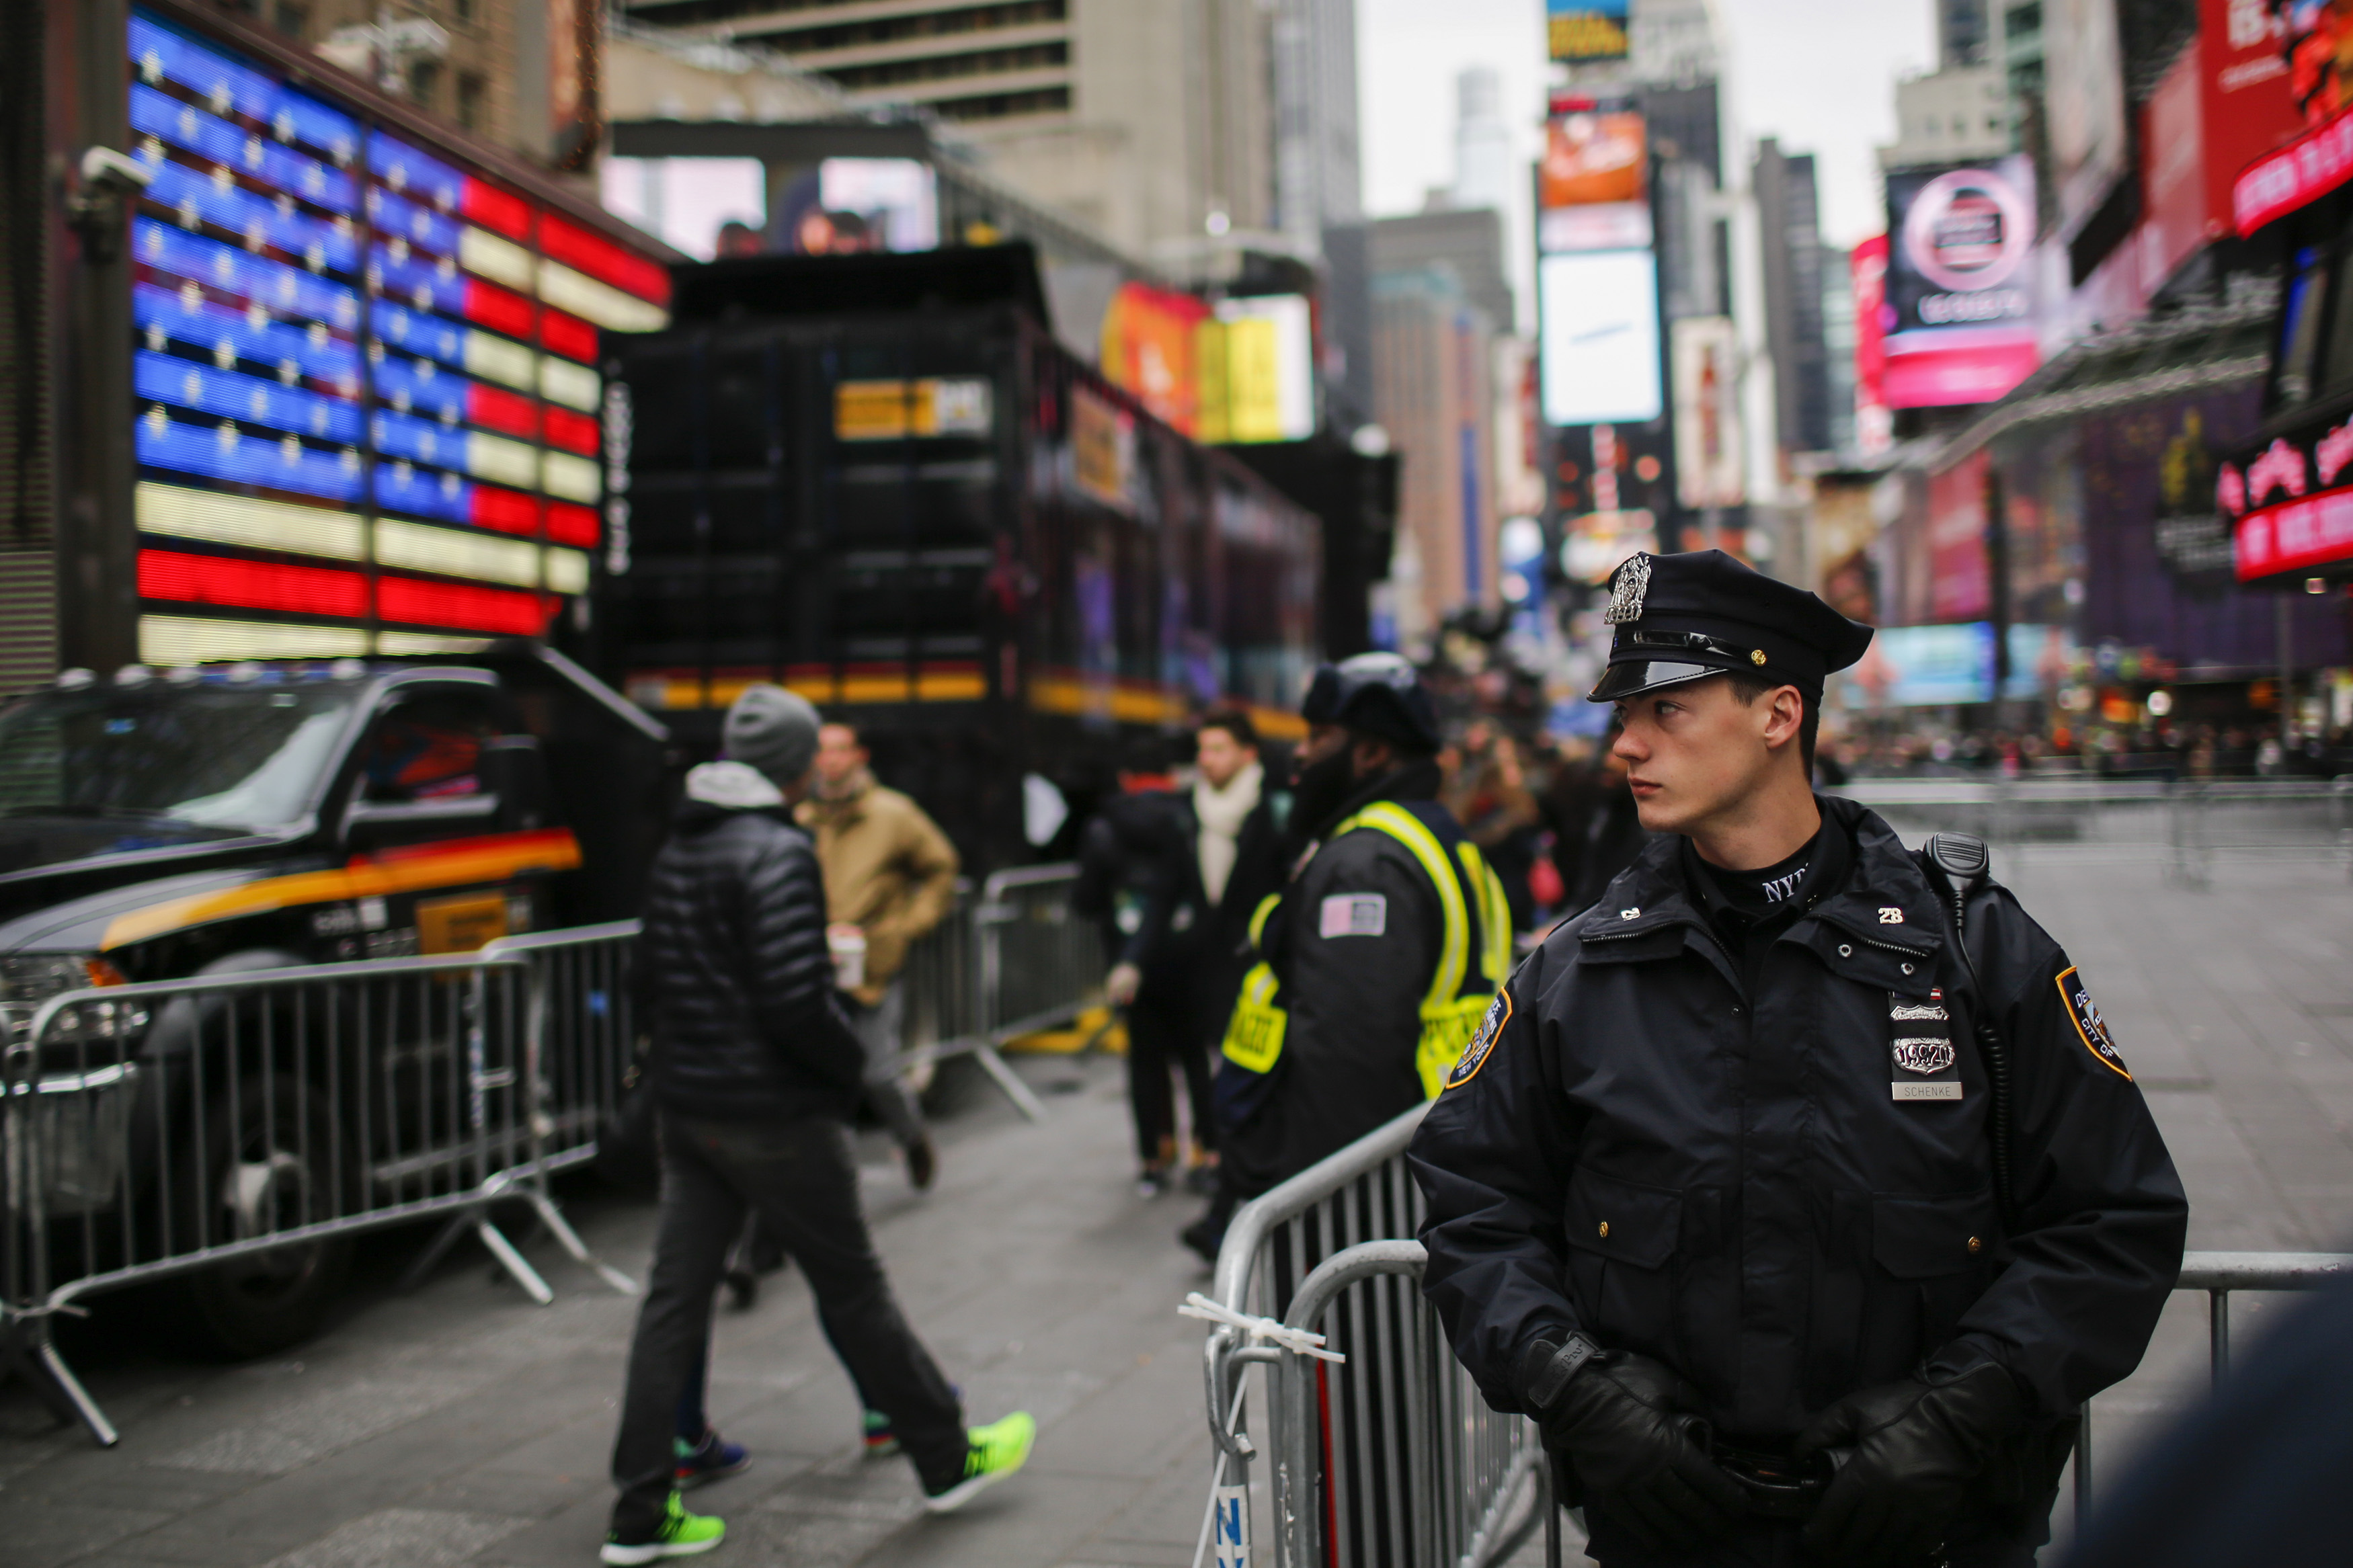 New York Police Officers keeps an eye on people at Times Square before New Year's Eve celebrations on December 31, 2015. (Getty)